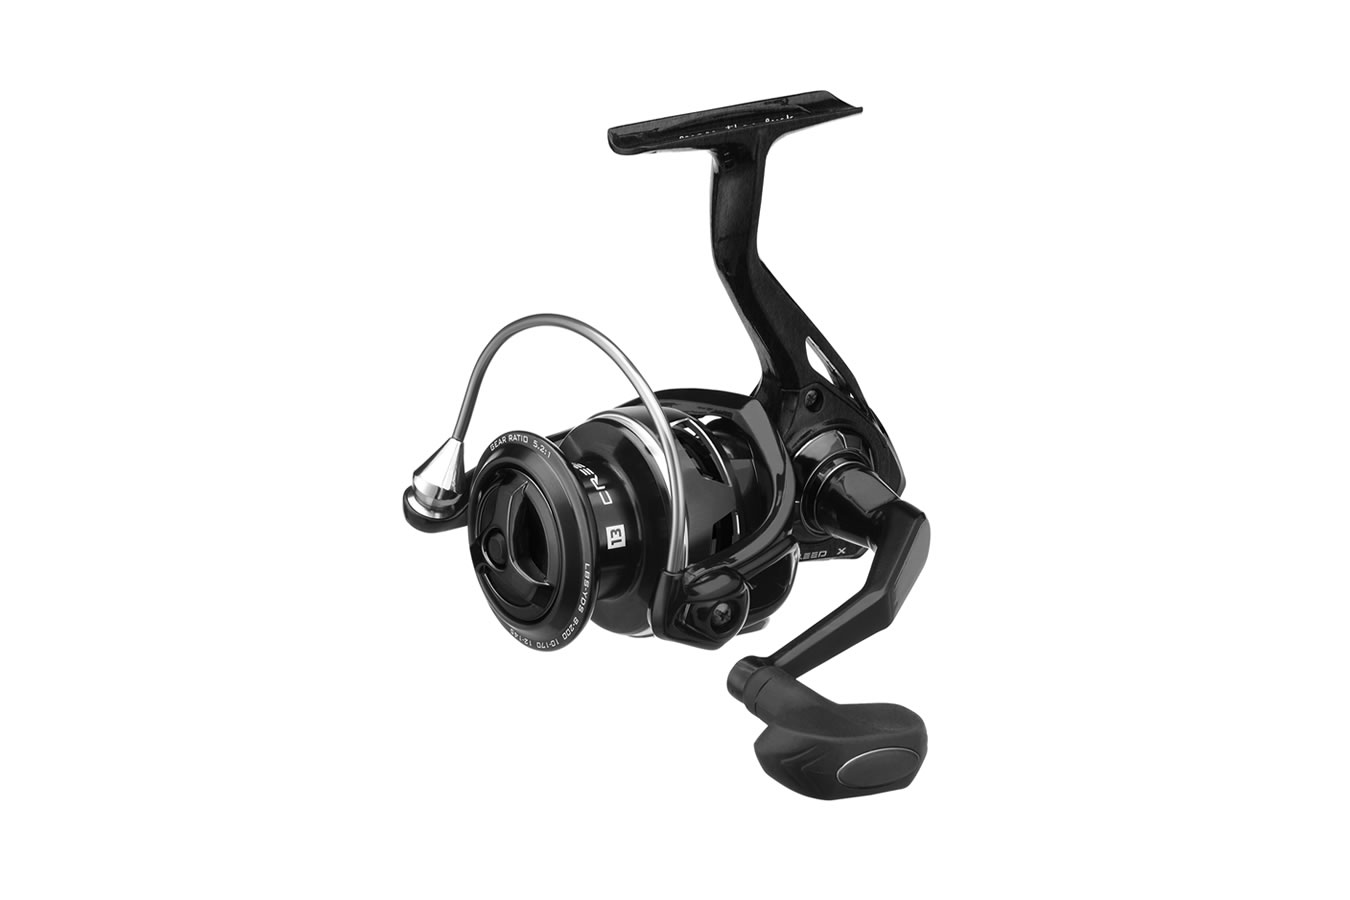 Discount 13 Fishing Creed X 4000 - Spinning Reel (5.2:1) for Sale, Online Fishing  Reels Store